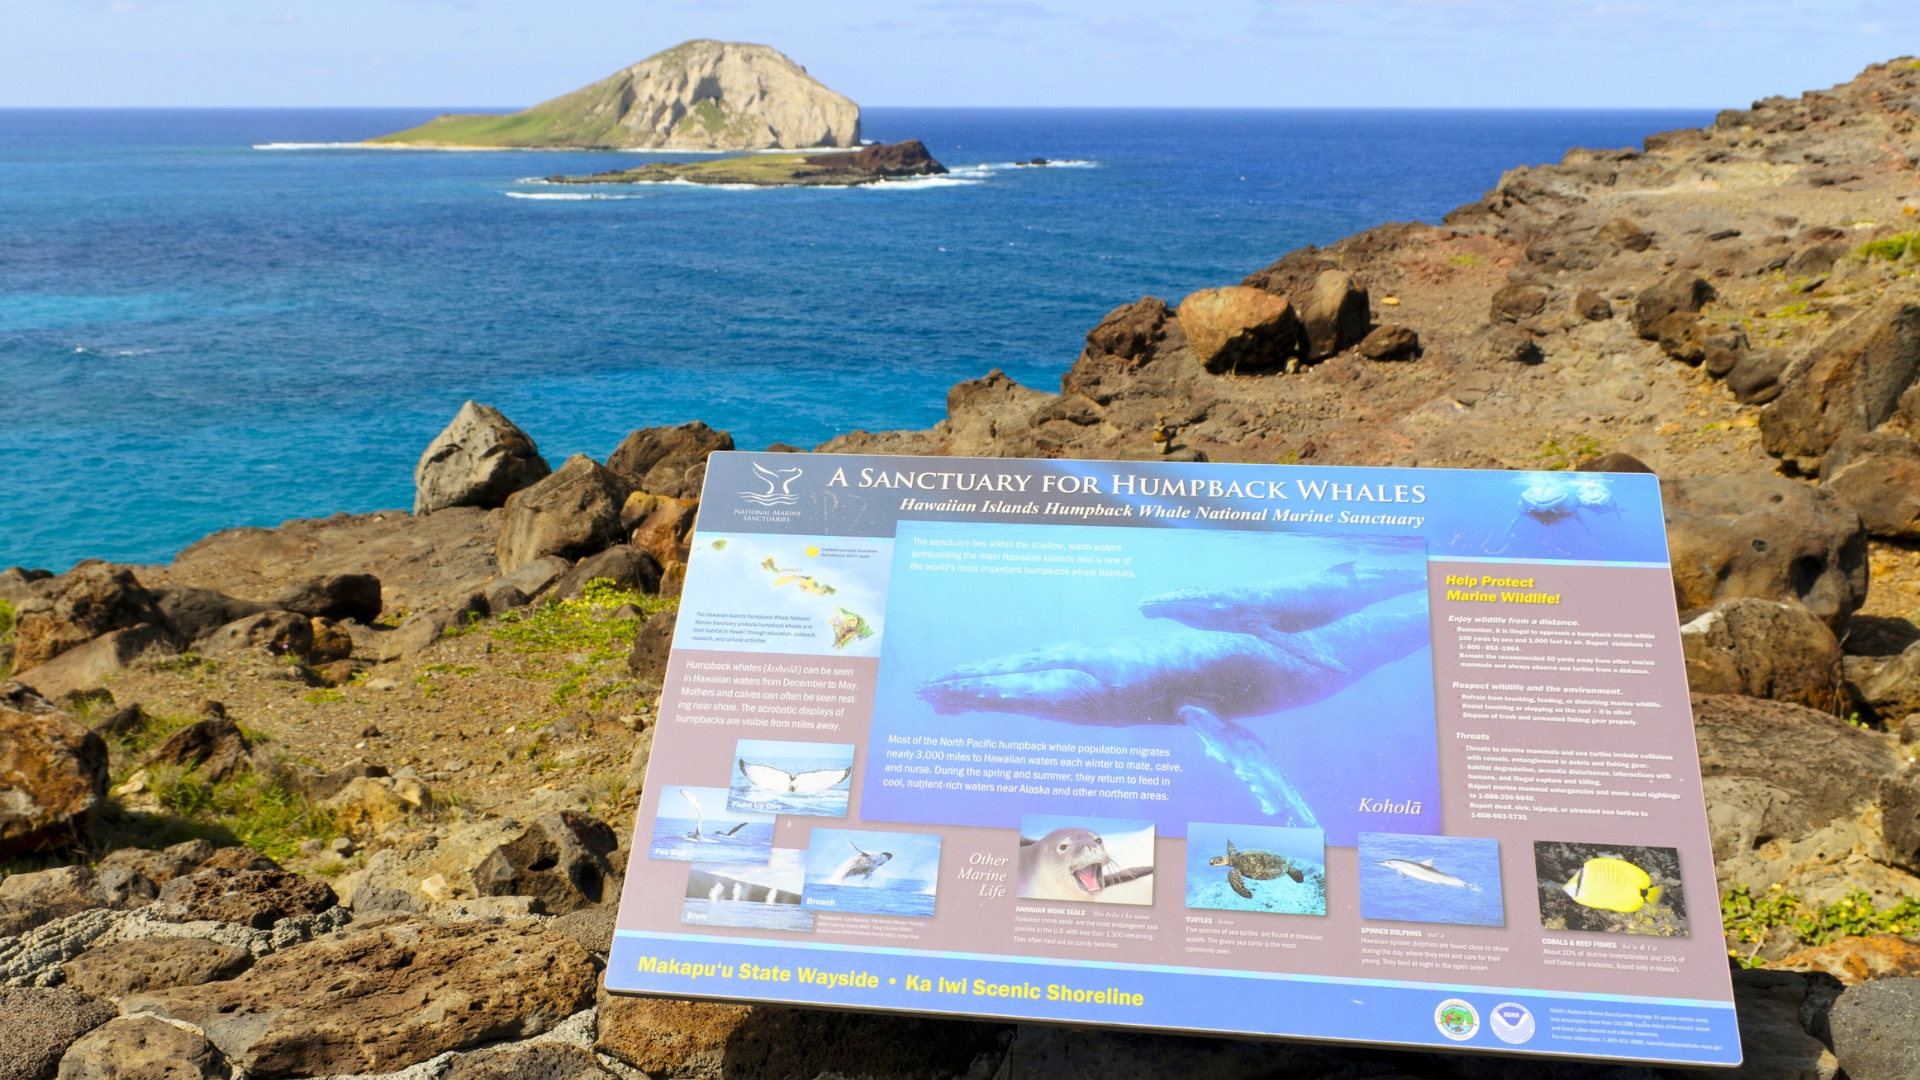 Sanctuary for Humpback Whales in Oahu